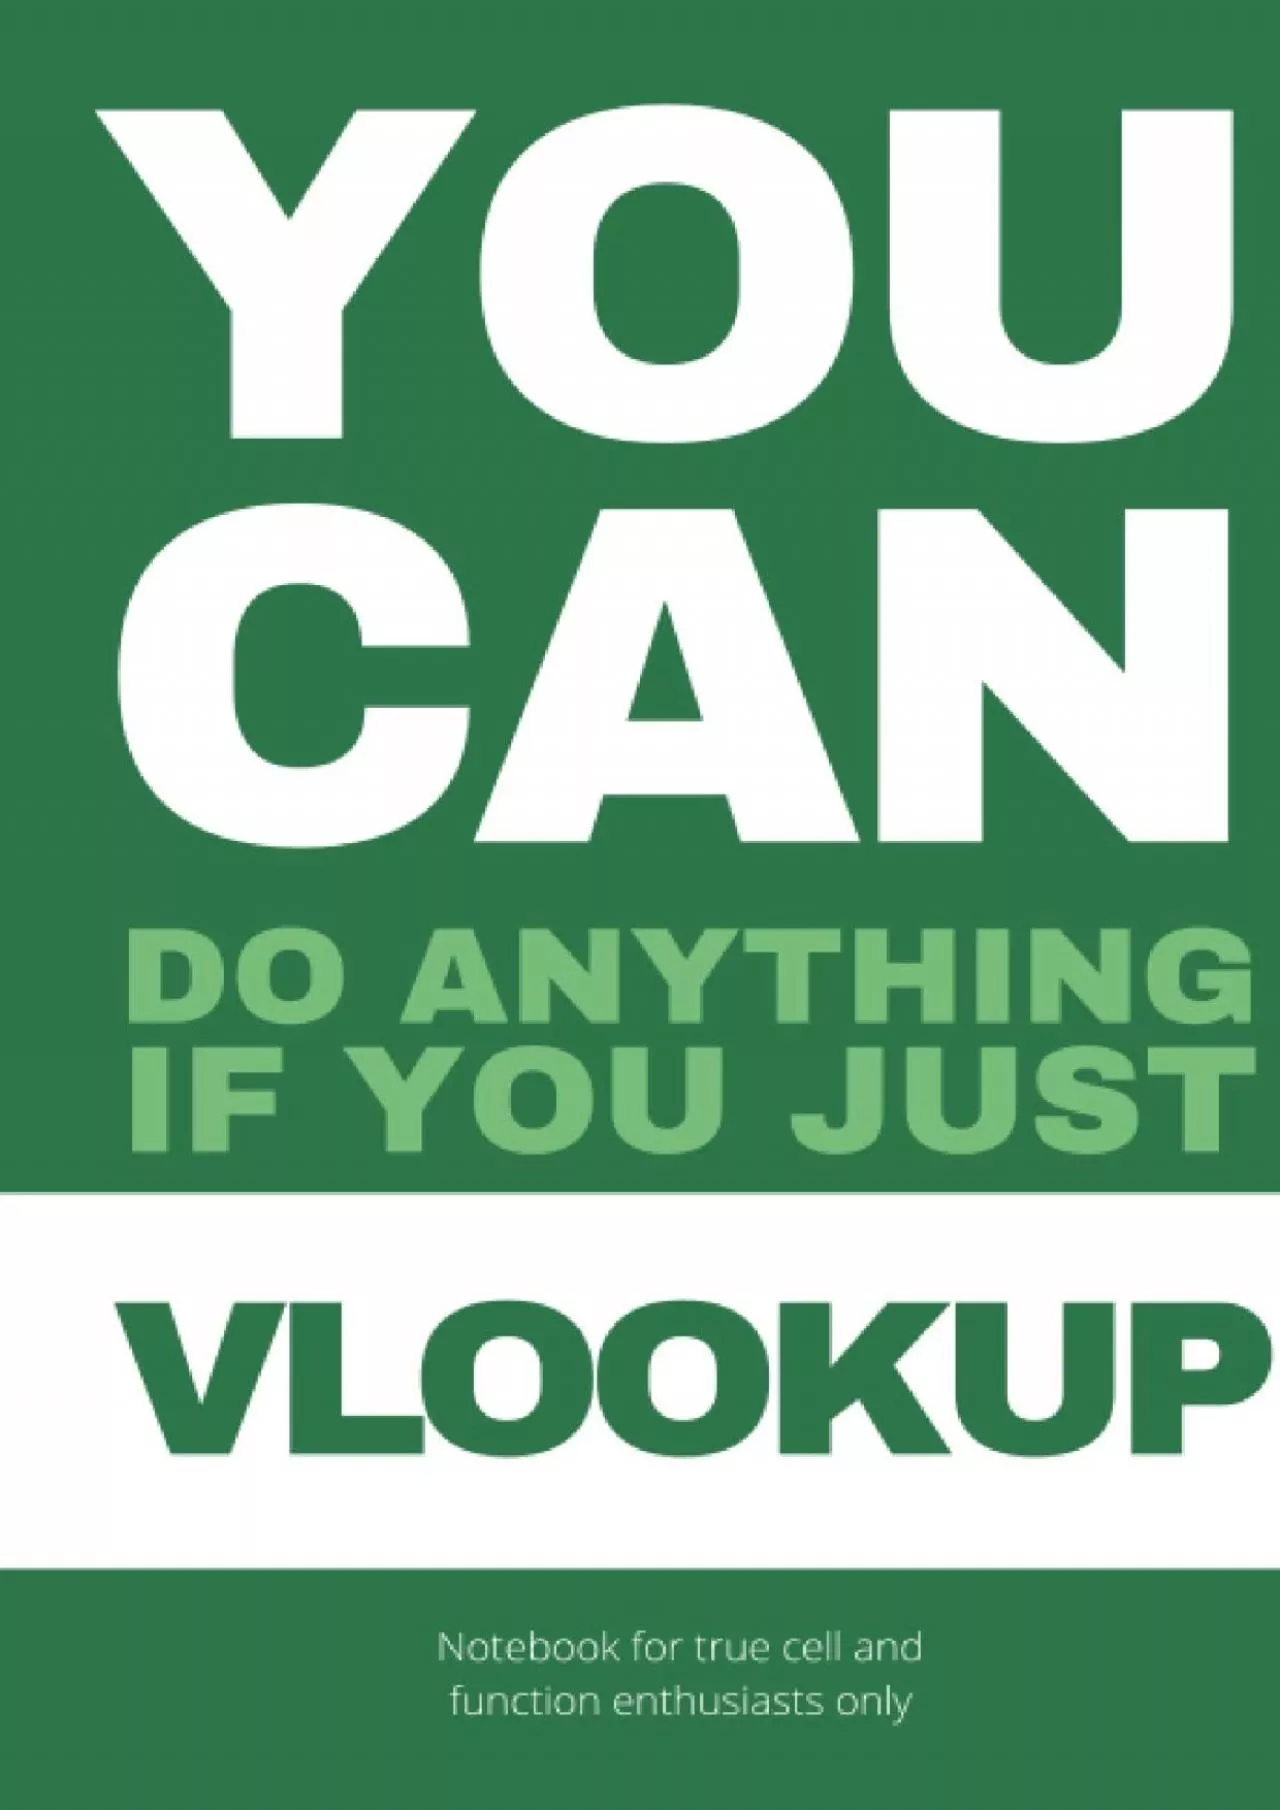 (DOWNLOAD)-YOU CAN do anything if you just VLOOKUP: The ultimate notebook for true cell